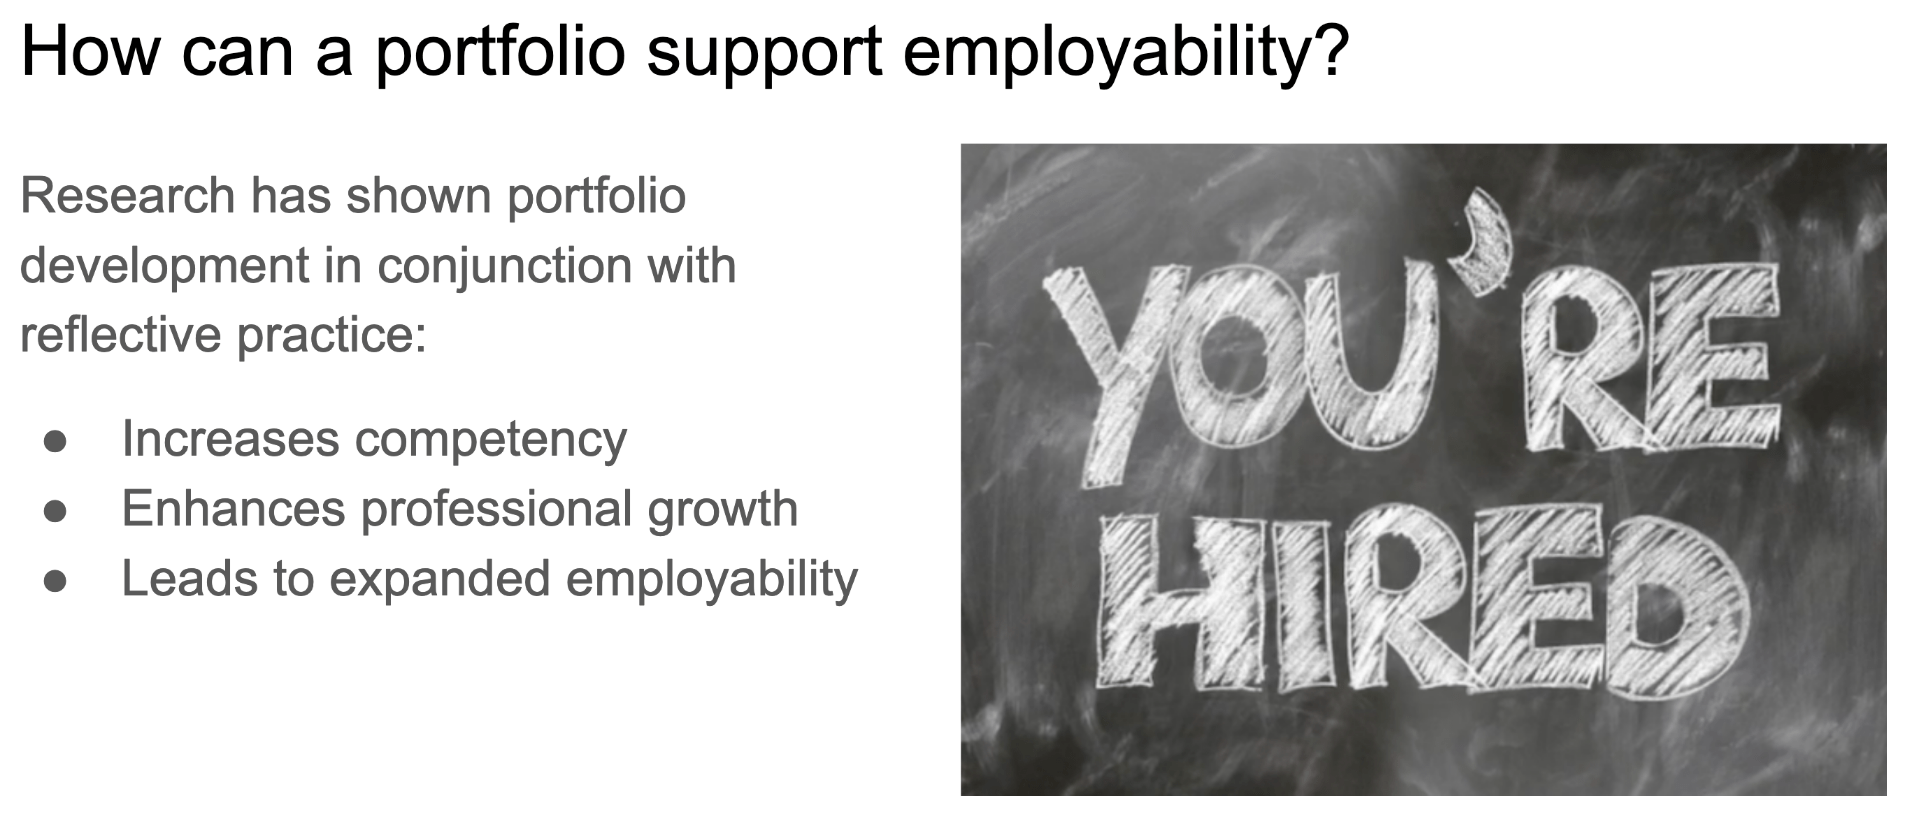 Image: How can a portfolio support employability?